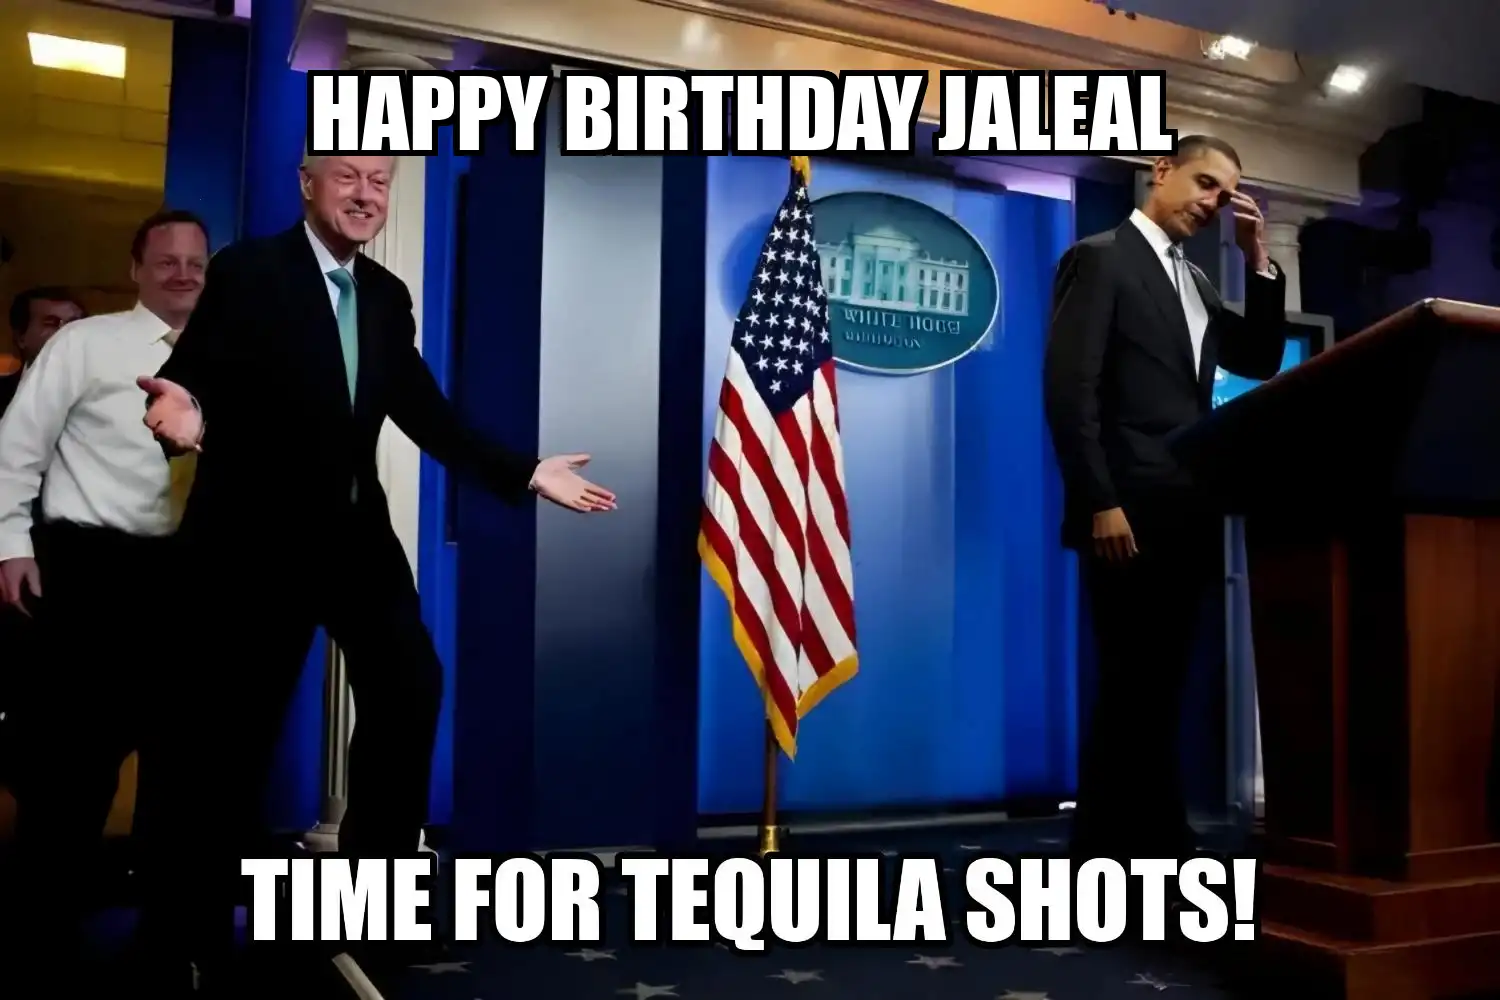 Happy Birthday Jaleal Time For Tequila Shots Memes